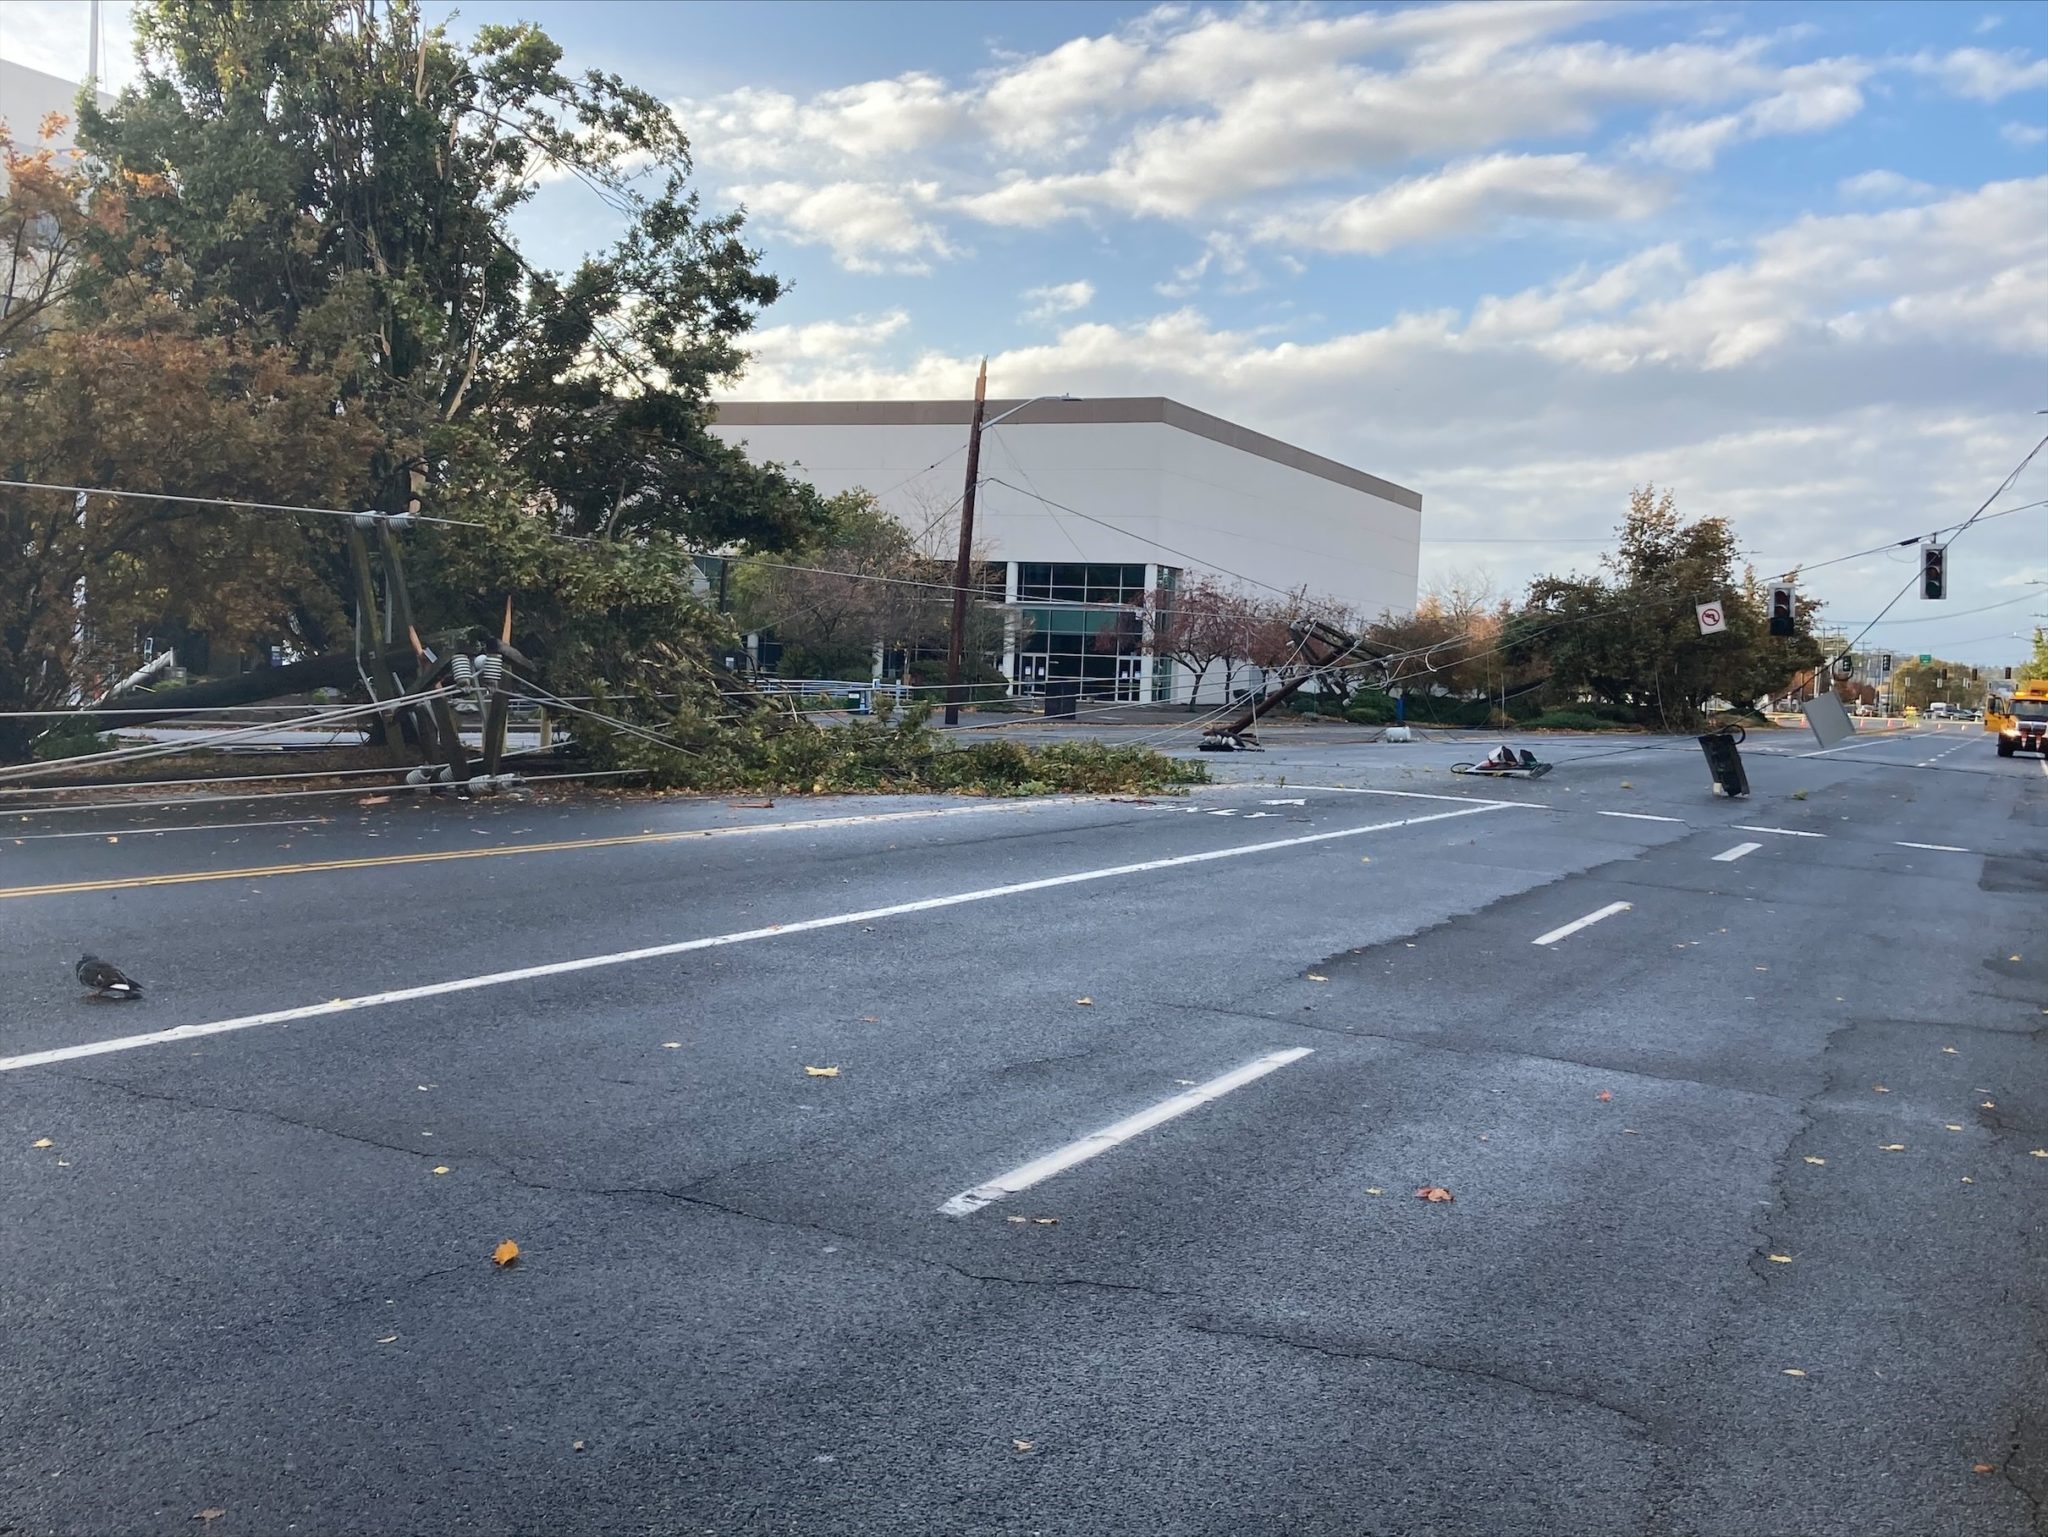 Photo of downed trees, power poles, power lines, and traffic signals on a section of E Marginal Way in Seattle. The road has been closed to ensure the safety of the traveling public while crews work to address the storm damage. Closed roadway lanes are visible in the foreground with trees and other debris in the upper left of the image.